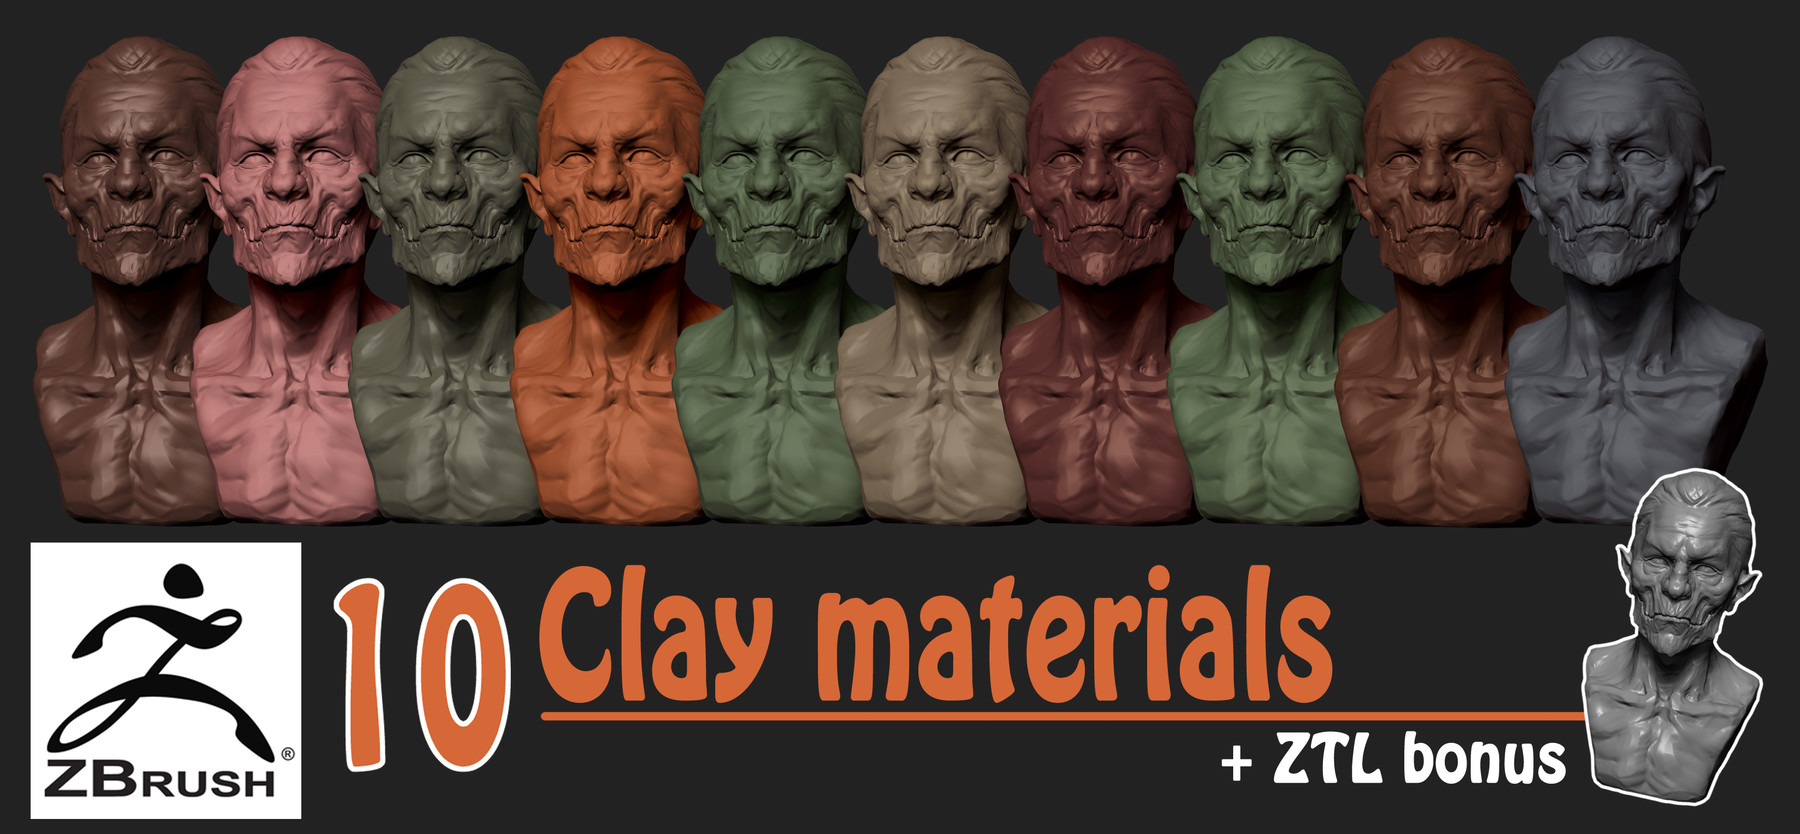 add more shaders materal zbrush